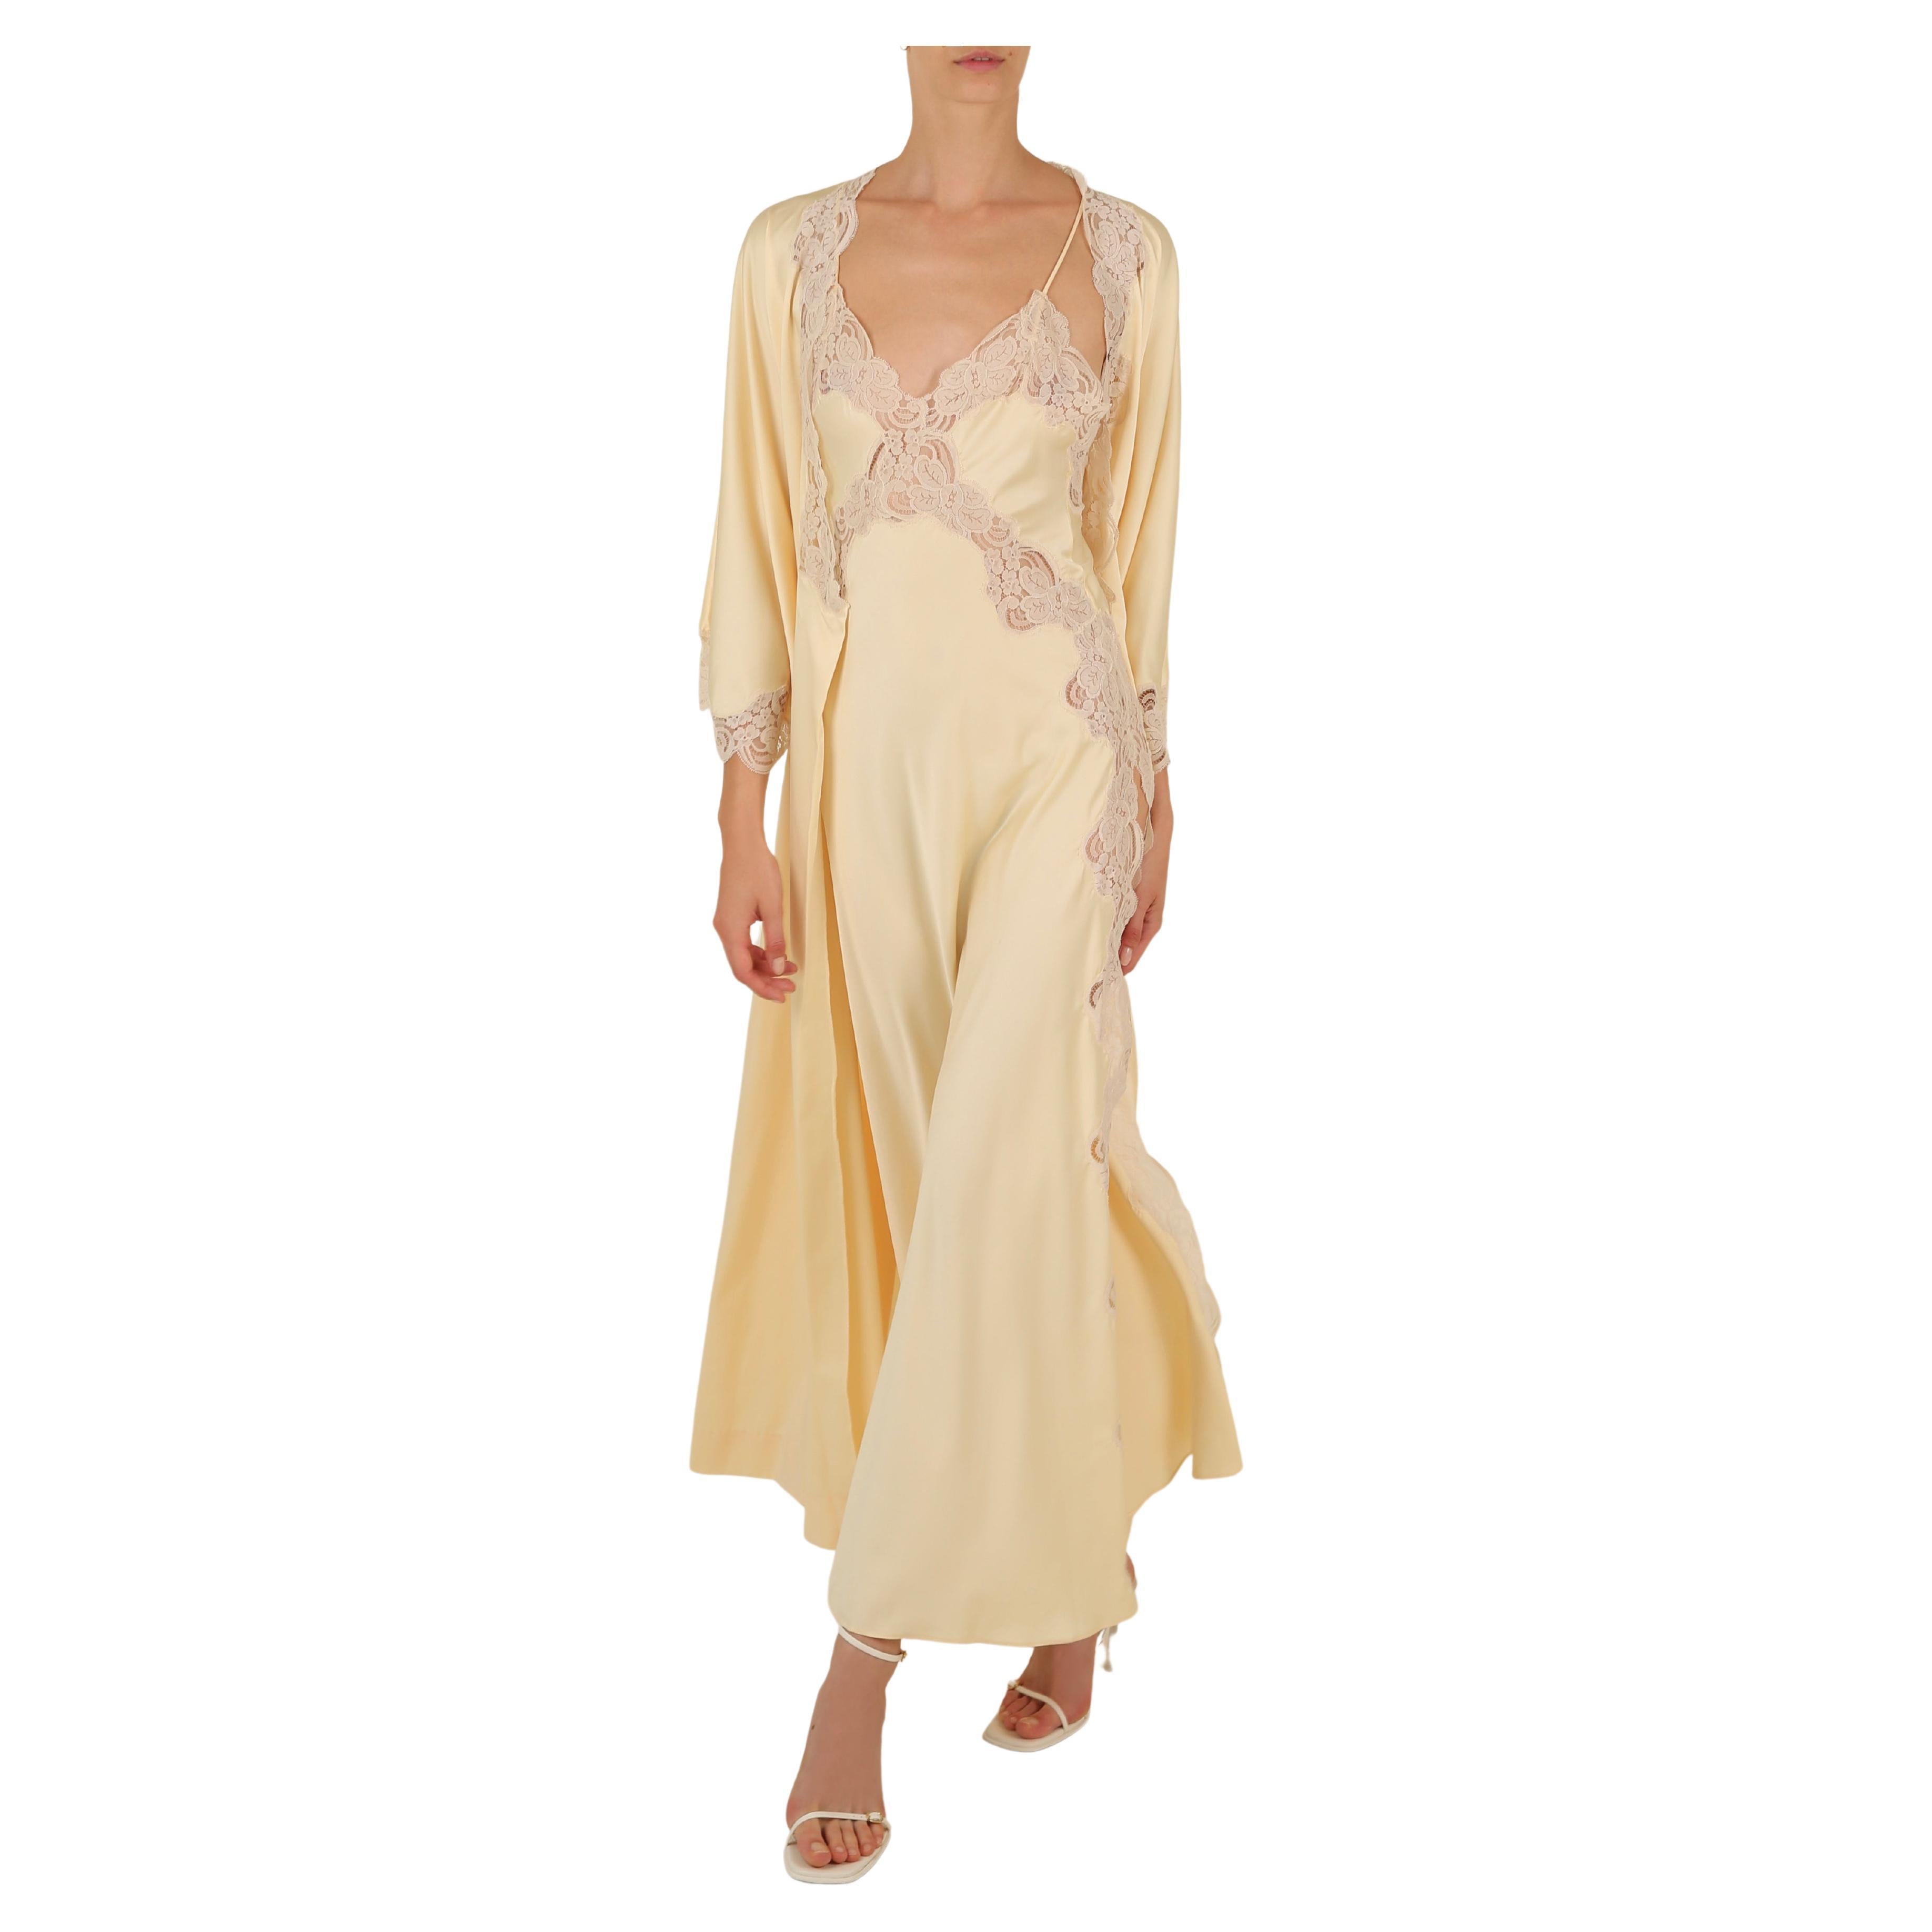 Vintage 1970's silk lace yellow backless thigh slit night gown slip dress & robe